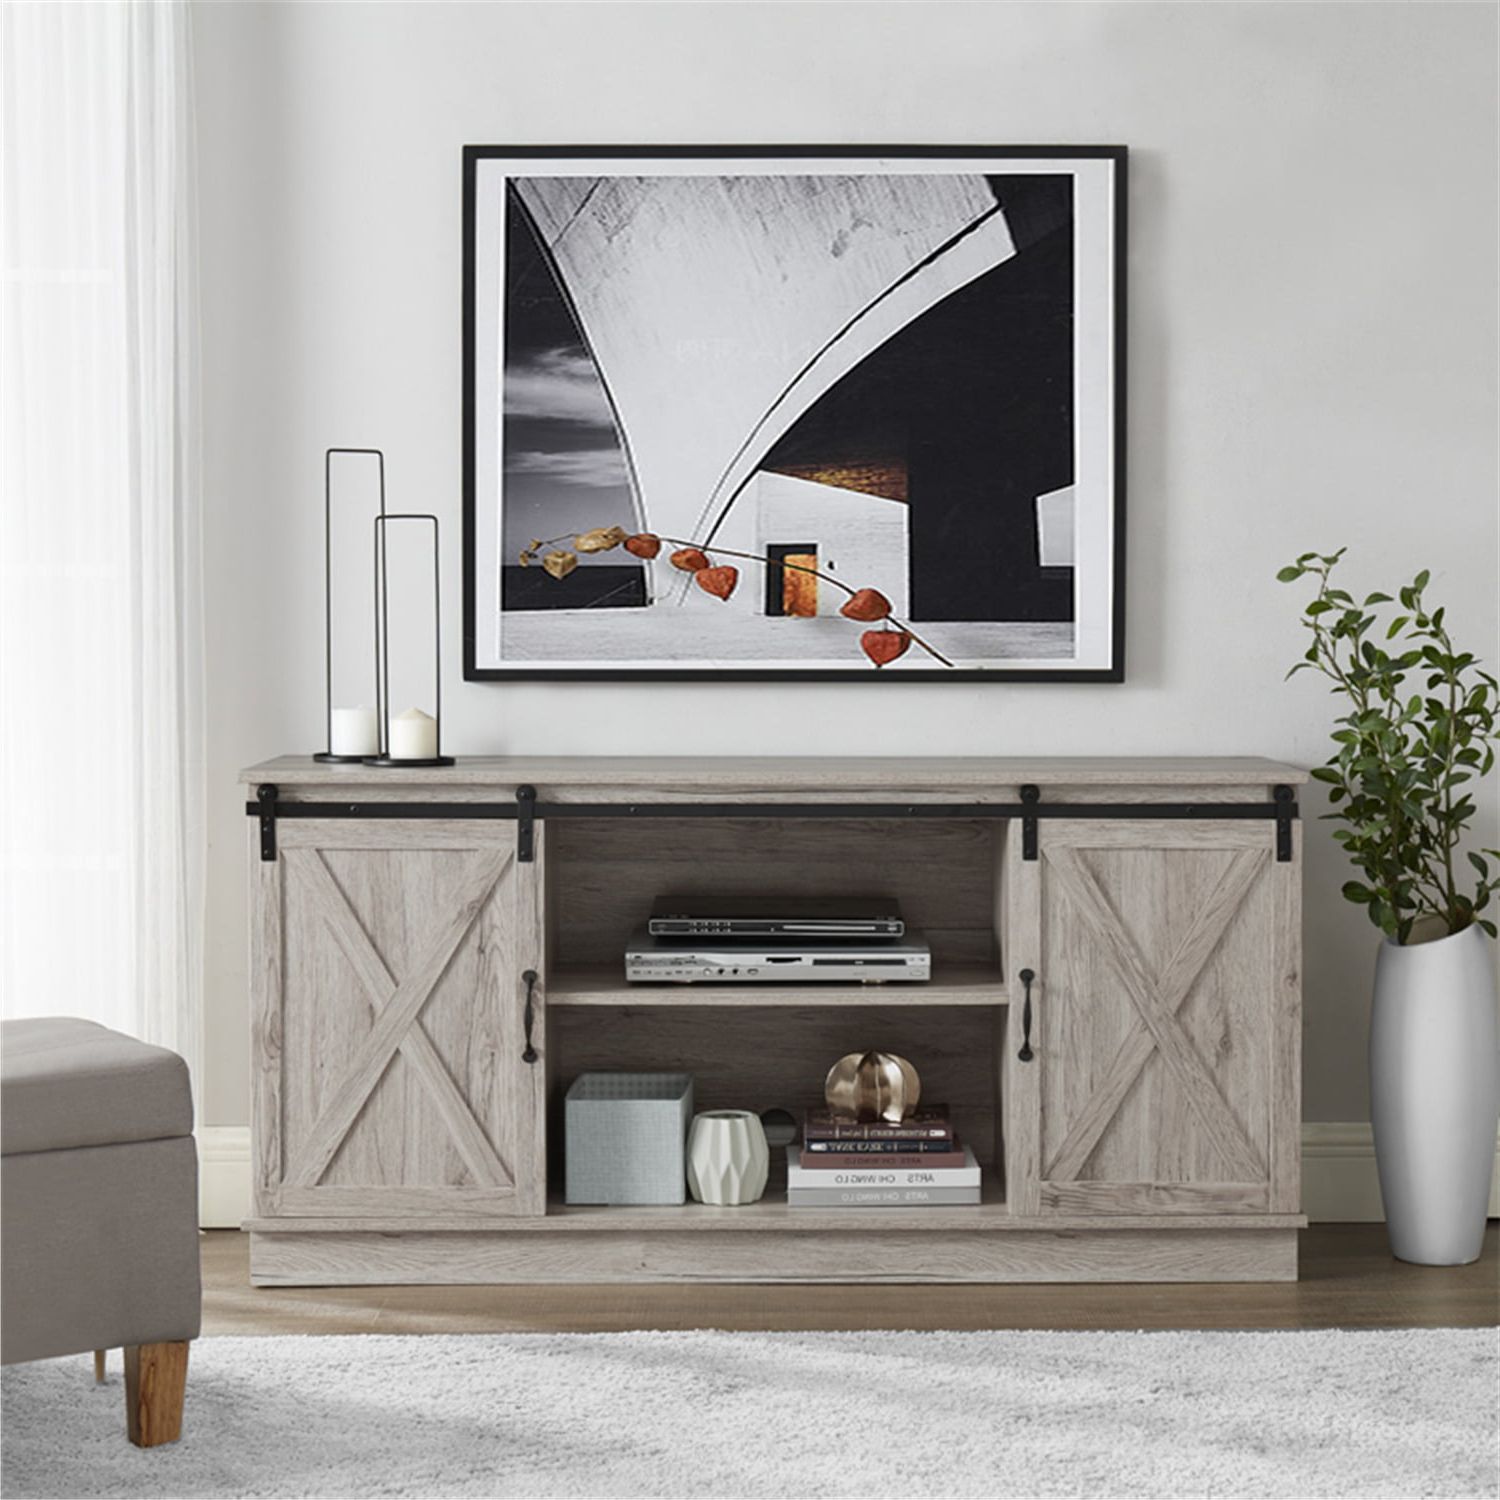 Farmhouse Style Tv Stands With Well Liked Naomi Home Rylee Farmhouse Tv Stand With Storage, Rustic Wooden 60 Inch Tv  Console Cabinet With Sliding Barn Doors Entertainment Center For Living  Room Decor – Natural – Walmart (View 5 of 10)